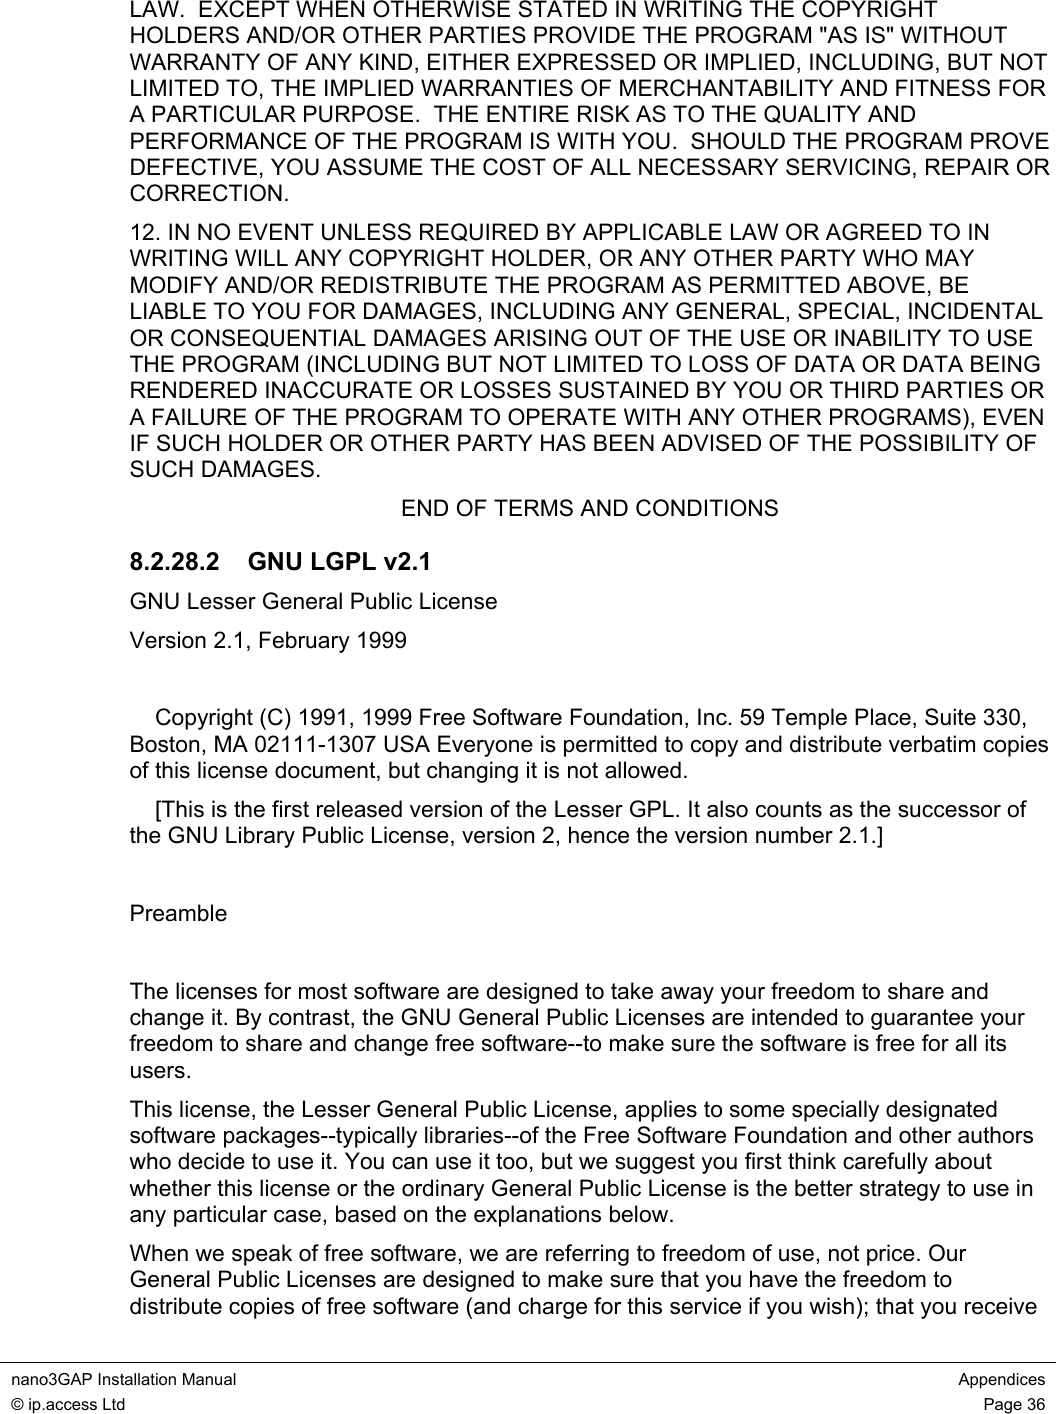  nano3GAP Installation Manual  Appendices © ip.access Ltd  Page 36  LAW.  EXCEPT WHEN OTHERWISE STATED IN WRITING THE COPYRIGHT HOLDERS AND/OR OTHER PARTIES PROVIDE THE PROGRAM &quot;AS IS&quot; WITHOUT WARRANTY OF ANY KIND, EITHER EXPRESSED OR IMPLIED, INCLUDING, BUT NOT LIMITED TO, THE IMPLIED WARRANTIES OF MERCHANTABILITY AND FITNESS FOR A PARTICULAR PURPOSE.  THE ENTIRE RISK AS TO THE QUALITY AND PERFORMANCE OF THE PROGRAM IS WITH YOU.  SHOULD THE PROGRAM PROVE DEFECTIVE, YOU ASSUME THE COST OF ALL NECESSARY SERVICING, REPAIR OR CORRECTION. 12. IN NO EVENT UNLESS REQUIRED BY APPLICABLE LAW OR AGREED TO IN WRITING WILL ANY COPYRIGHT HOLDER, OR ANY OTHER PARTY WHO MAY MODIFY AND/OR REDISTRIBUTE THE PROGRAM AS PERMITTED ABOVE, BE LIABLE TO YOU FOR DAMAGES, INCLUDING ANY GENERAL, SPECIAL, INCIDENTAL OR CONSEQUENTIAL DAMAGES ARISING OUT OF THE USE OR INABILITY TO USE THE PROGRAM (INCLUDING BUT NOT LIMITED TO LOSS OF DATA OR DATA BEING RENDERED INACCURATE OR LOSSES SUSTAINED BY YOU OR THIRD PARTIES OR A FAILURE OF THE PROGRAM TO OPERATE WITH ANY OTHER PROGRAMS), EVEN IF SUCH HOLDER OR OTHER PARTY HAS BEEN ADVISED OF THE POSSIBILITY OF SUCH DAMAGES. END OF TERMS AND CONDITIONS 8.2.28.2  GNU LGPL v2.1 GNU Lesser General Public License Version 2.1, February 1999      Copyright (C) 1991, 1999 Free Software Foundation, Inc. 59 Temple Place, Suite 330, Boston, MA 02111-1307 USA Everyone is permitted to copy and distribute verbatim copies of this license document, but changing it is not allowed.     [This is the first released version of the Lesser GPL. It also counts as the successor of the GNU Library Public License, version 2, hence the version number 2.1.]  Preamble  The licenses for most software are designed to take away your freedom to share and change it. By contrast, the GNU General Public Licenses are intended to guarantee your freedom to share and change free software--to make sure the software is free for all its users. This license, the Lesser General Public License, applies to some specially designated software packages--typically libraries--of the Free Software Foundation and other authors who decide to use it. You can use it too, but we suggest you first think carefully about whether this license or the ordinary General Public License is the better strategy to use in any particular case, based on the explanations below. When we speak of free software, we are referring to freedom of use, not price. Our General Public Licenses are designed to make sure that you have the freedom to distribute copies of free software (and charge for this service if you wish); that you receive 